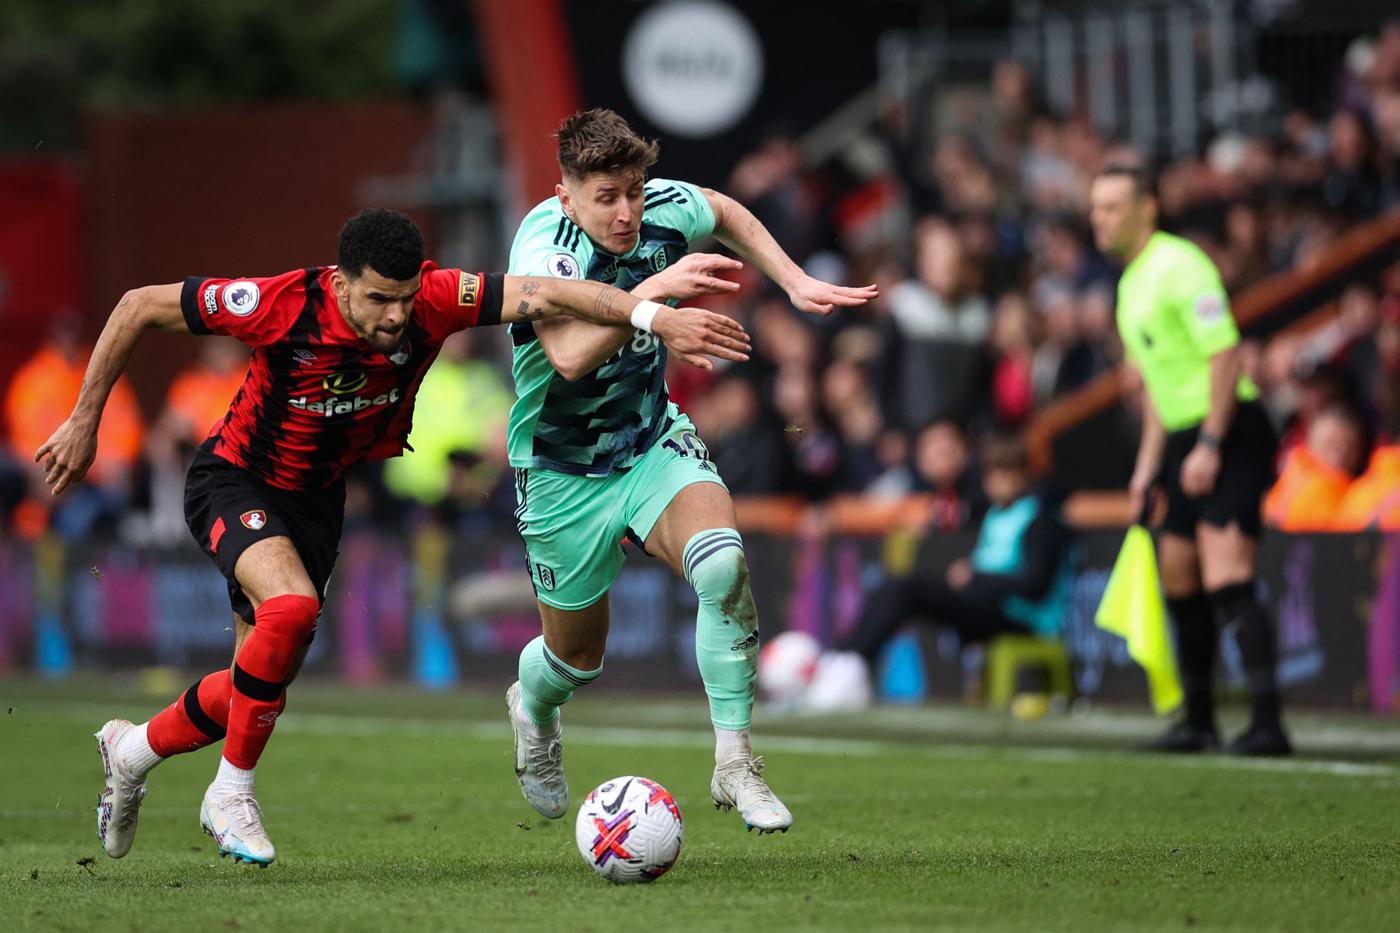 Bournemouth - Fulham - 2:1. Championship of England, 29th round. Match review, statistics